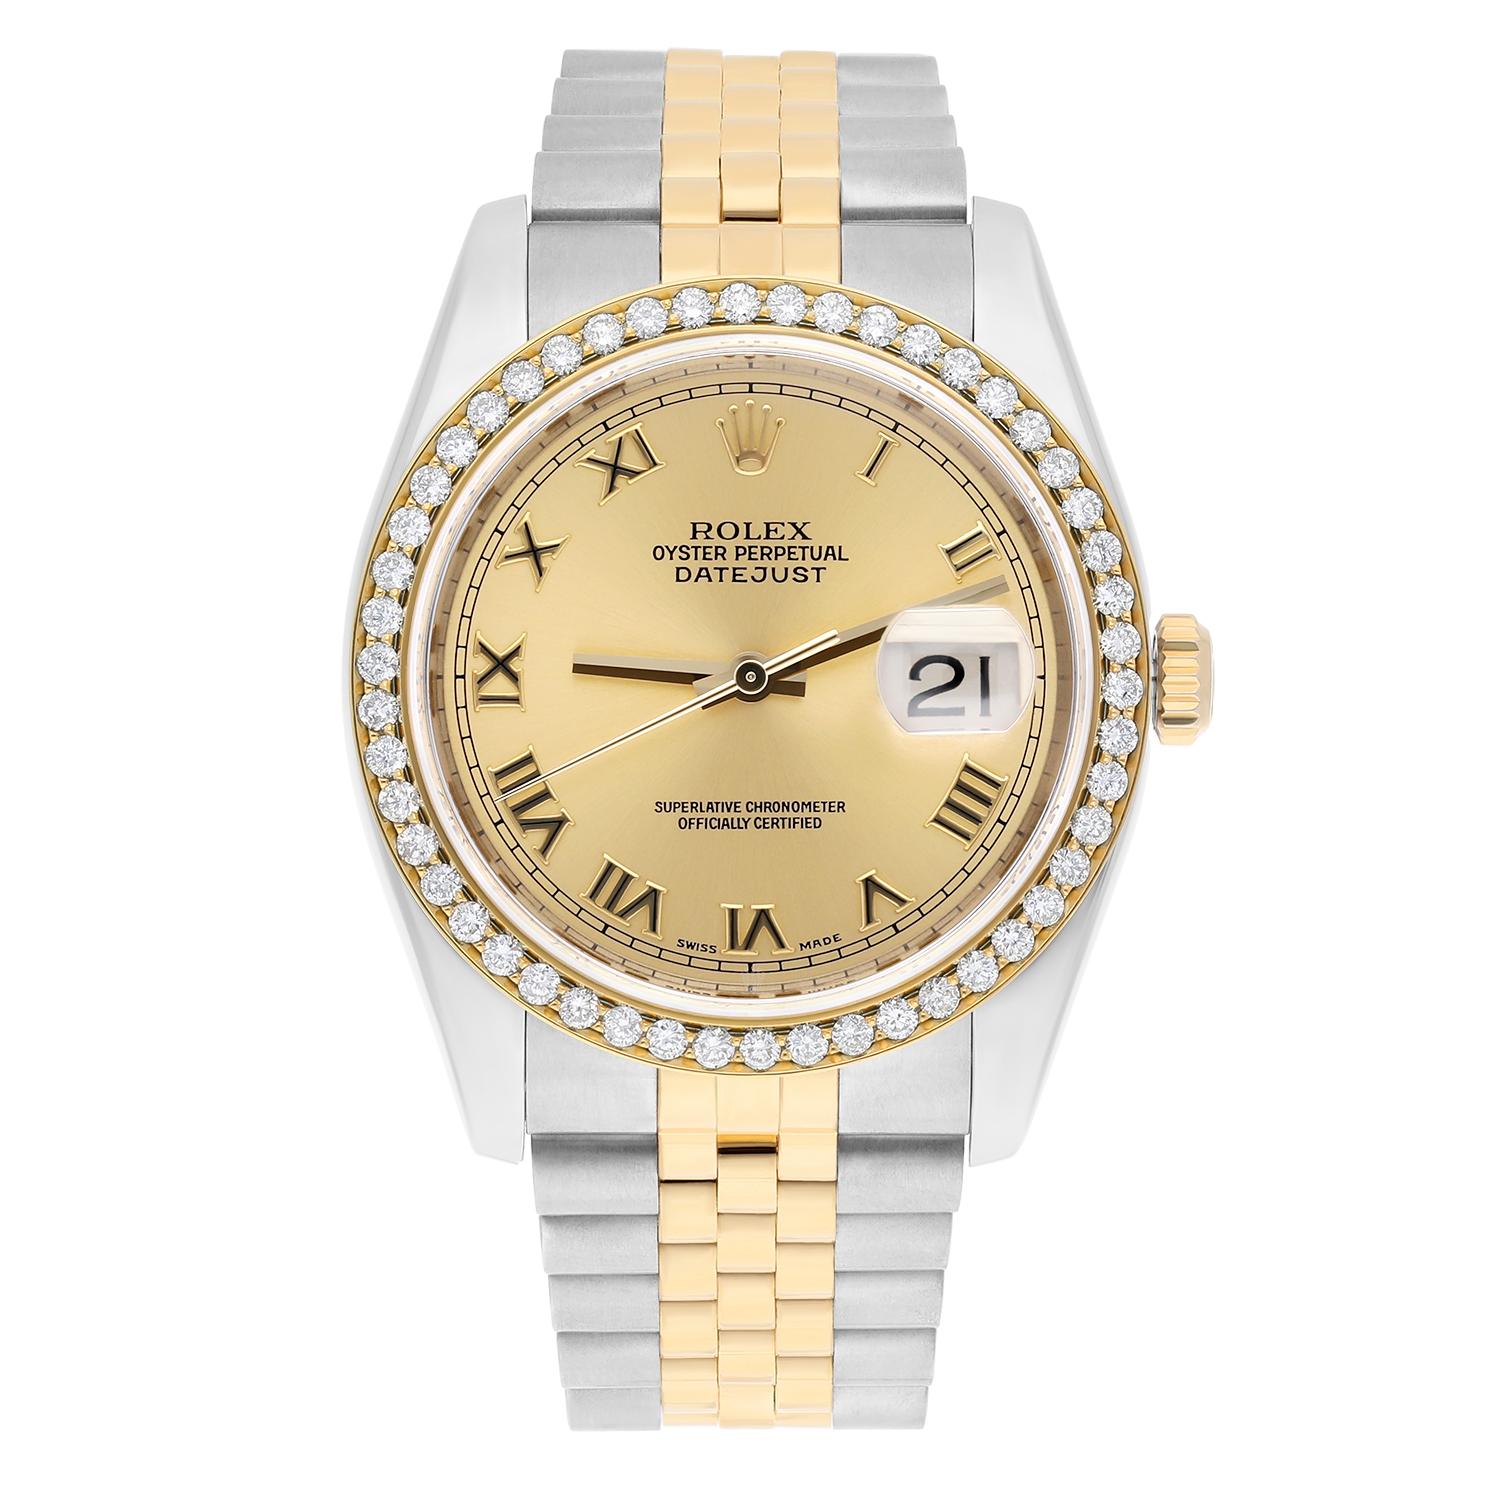 This watch has been professionally polished, serviced and is in excellent overall condition. There are absolutely no visible scratches or blemishes. Authenticity guaranteed!  Diamond bezel 18K gold plated, custom diamond set. Diamonds are 100%